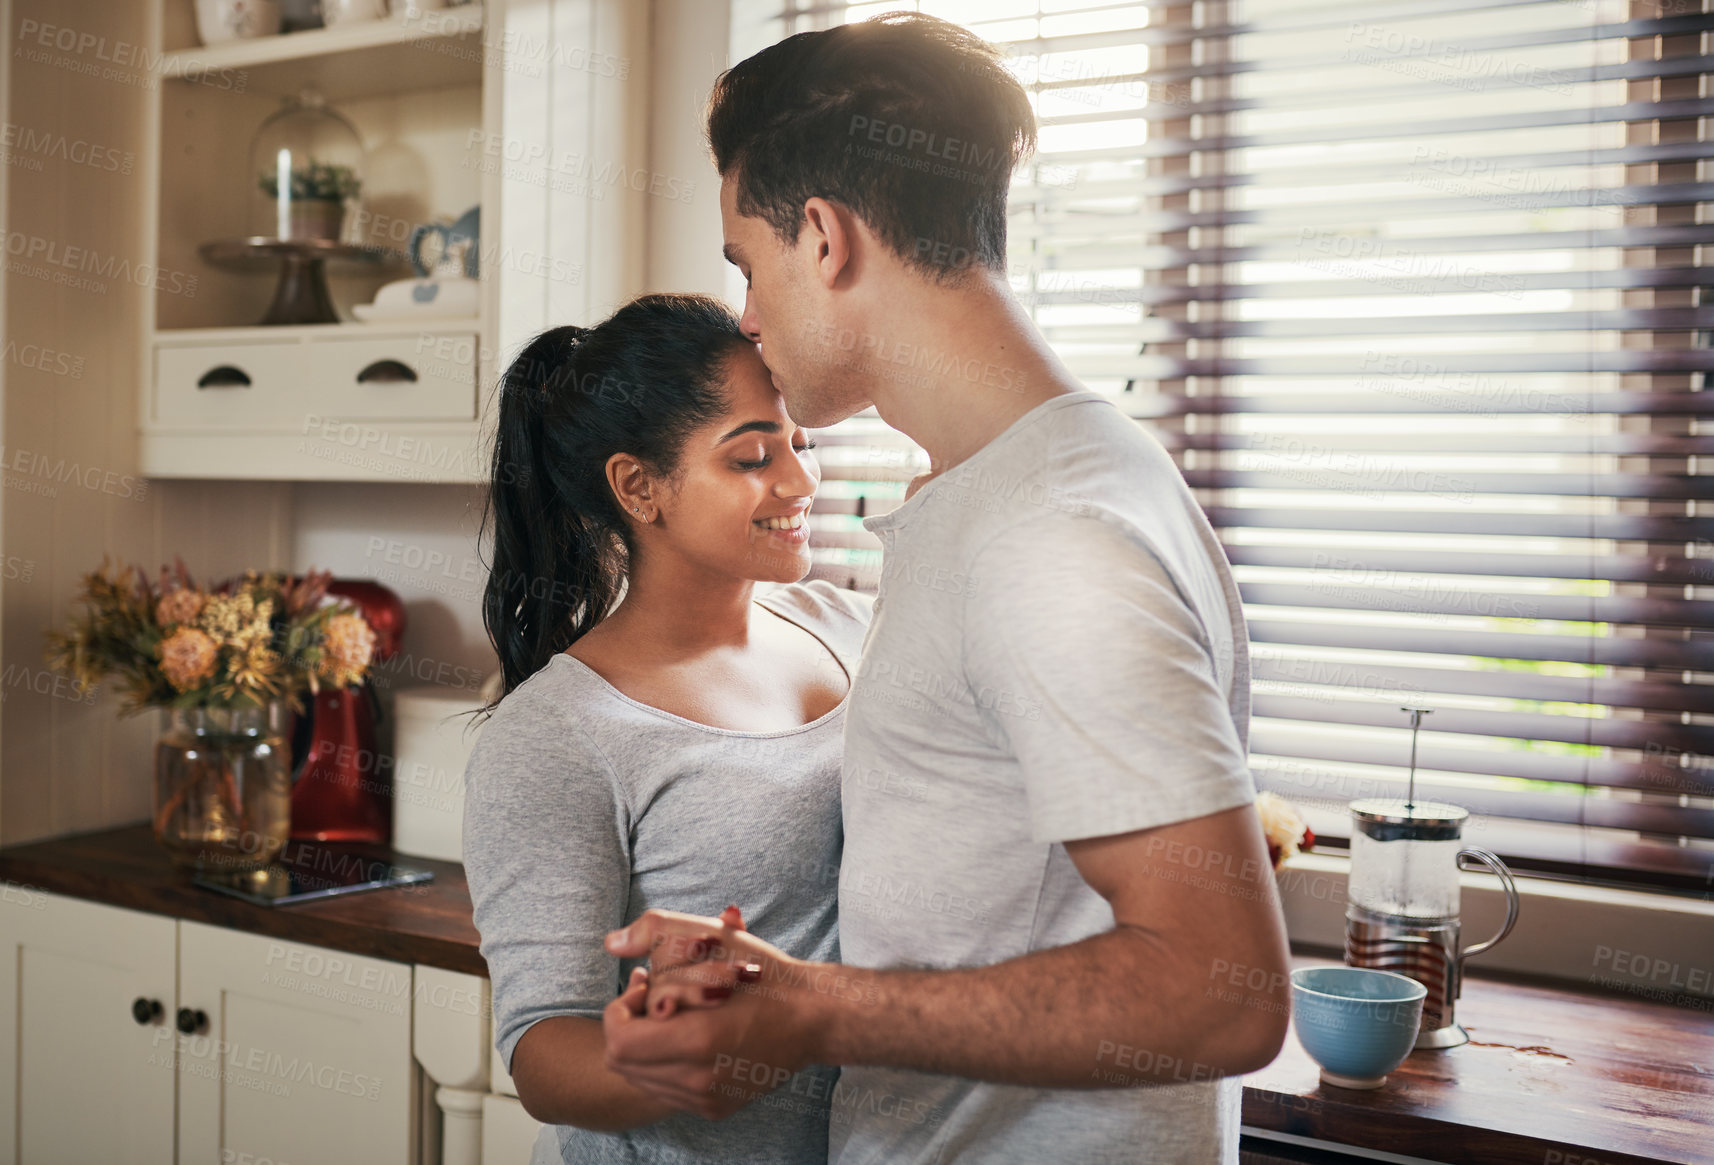 Buy stock photo Cropped shot of a happy young couple slow dancing in their kitchen